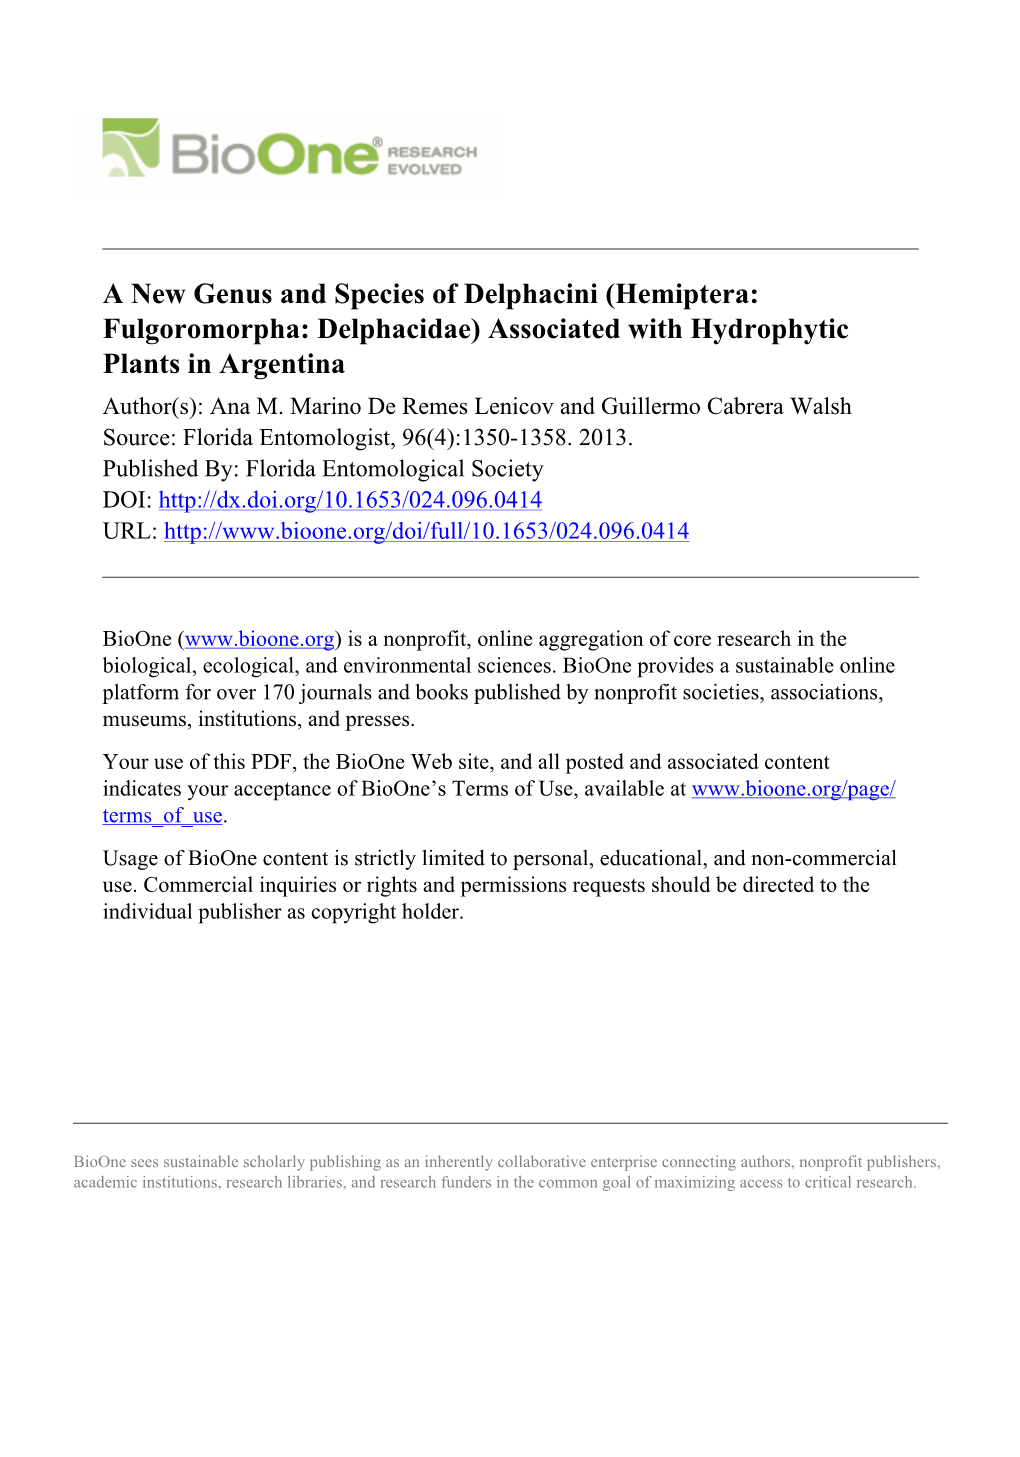 A New Genus and Species of Delphacini (Hemiptera: Fulgoromorpha: Delphacidae) Associated with Hydrophytic Plants in Argentina Author(S): Ana M